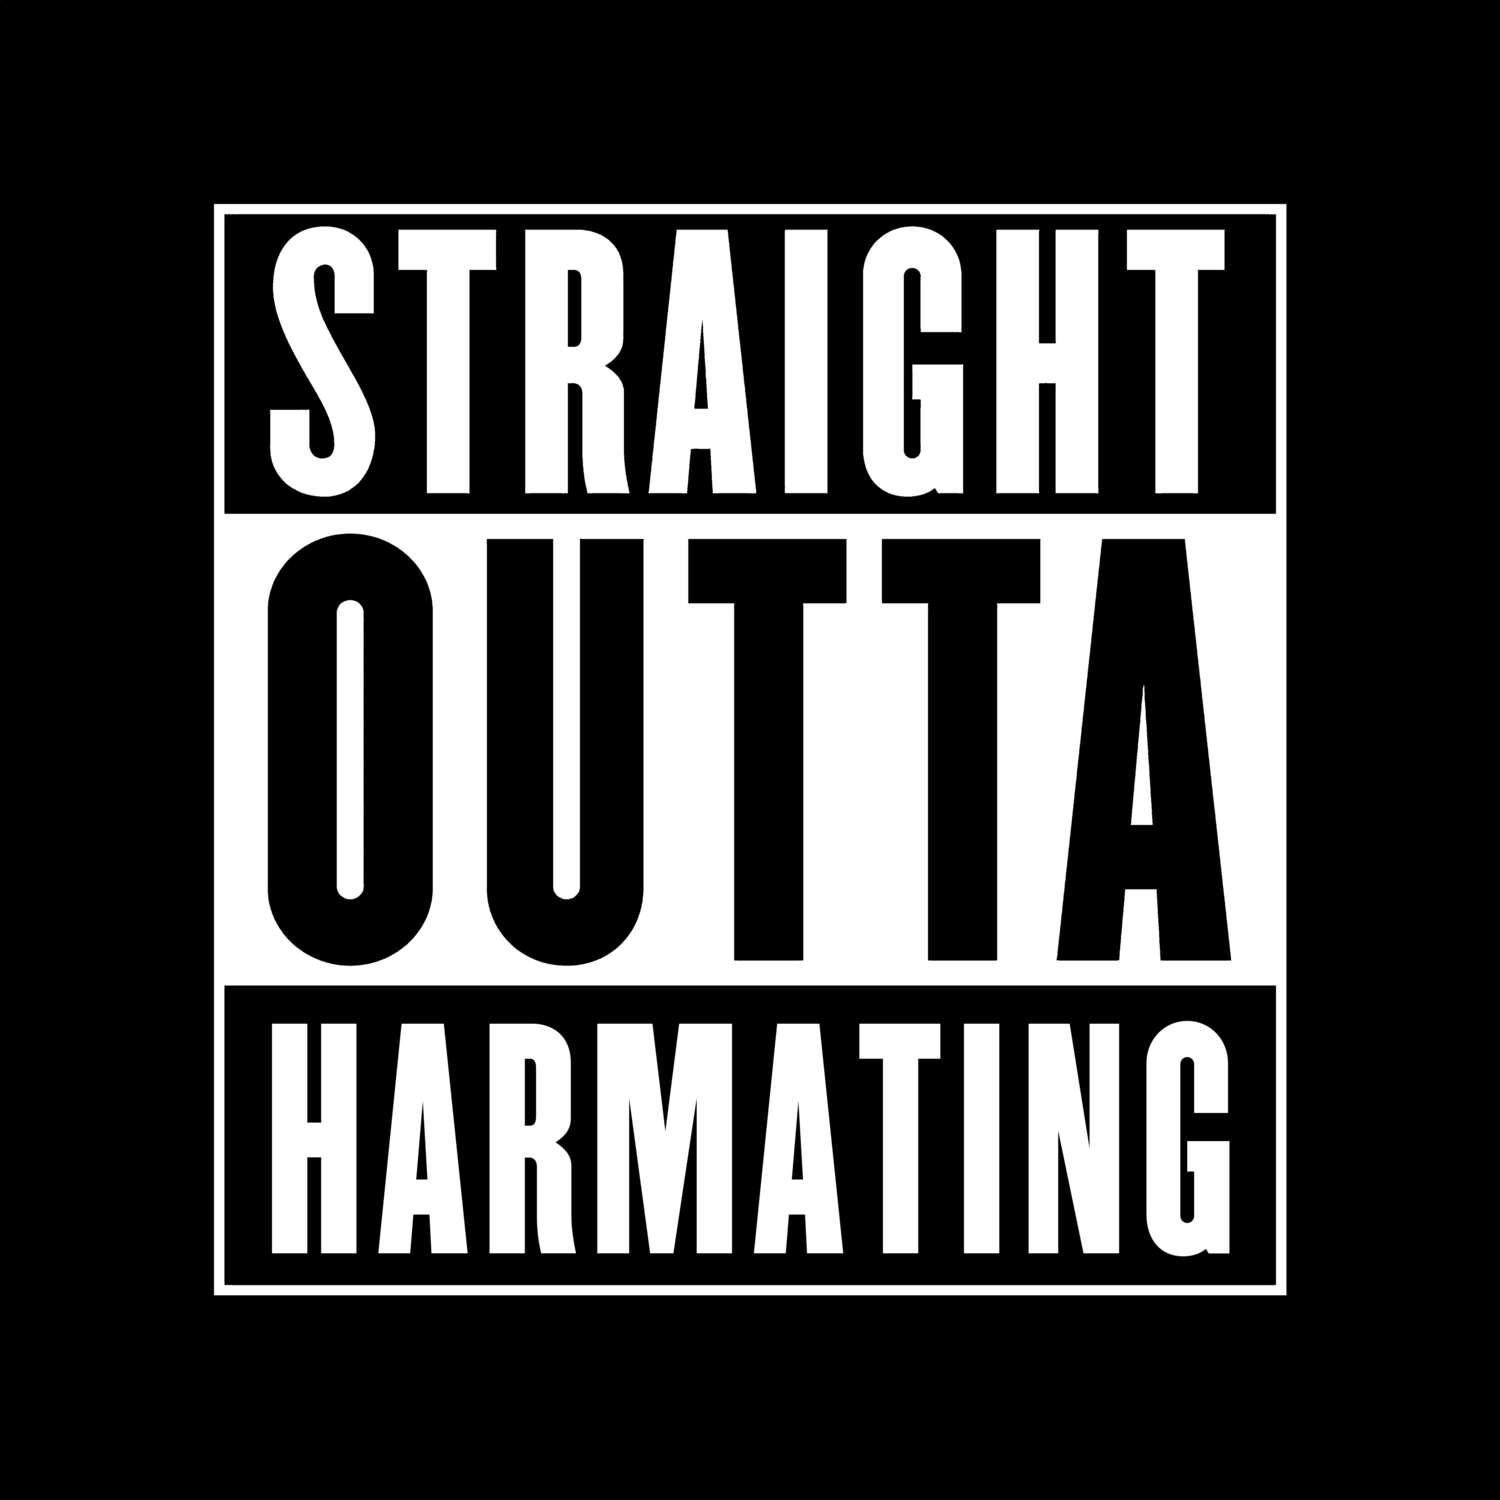 Harmating T-Shirt »Straight Outta«